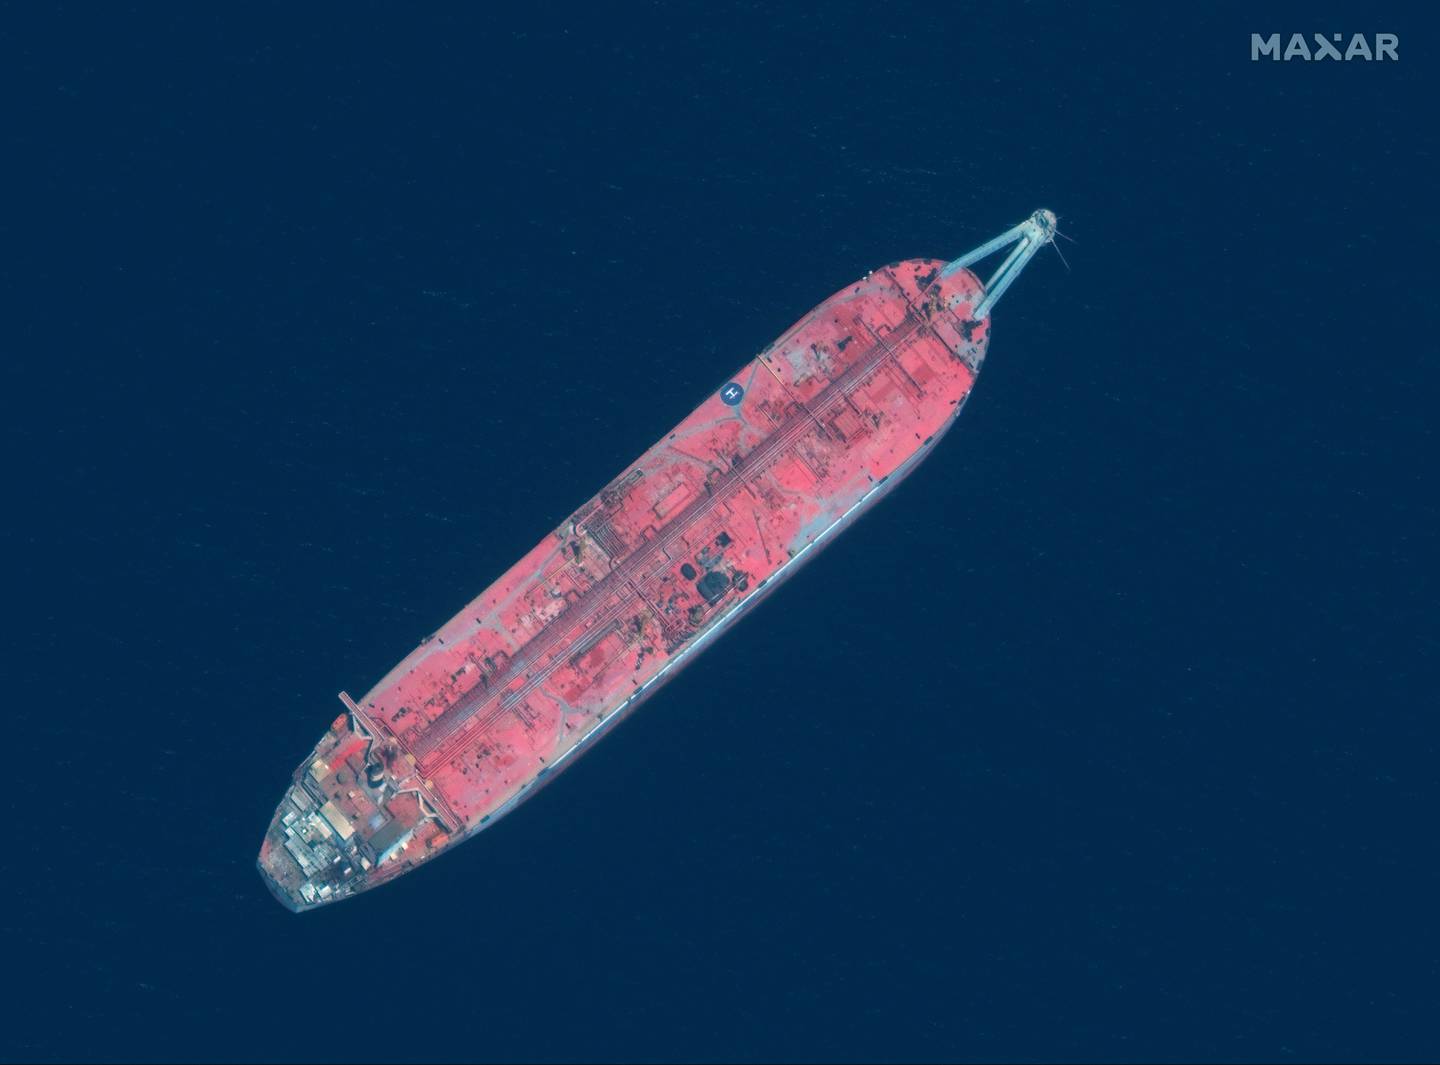 File satellite image provided by Maxar Technologies showing the 'FSO Safer' tanker moored off Ras Issa port, Yemen in June 2020.  Maxar Technologies via AP